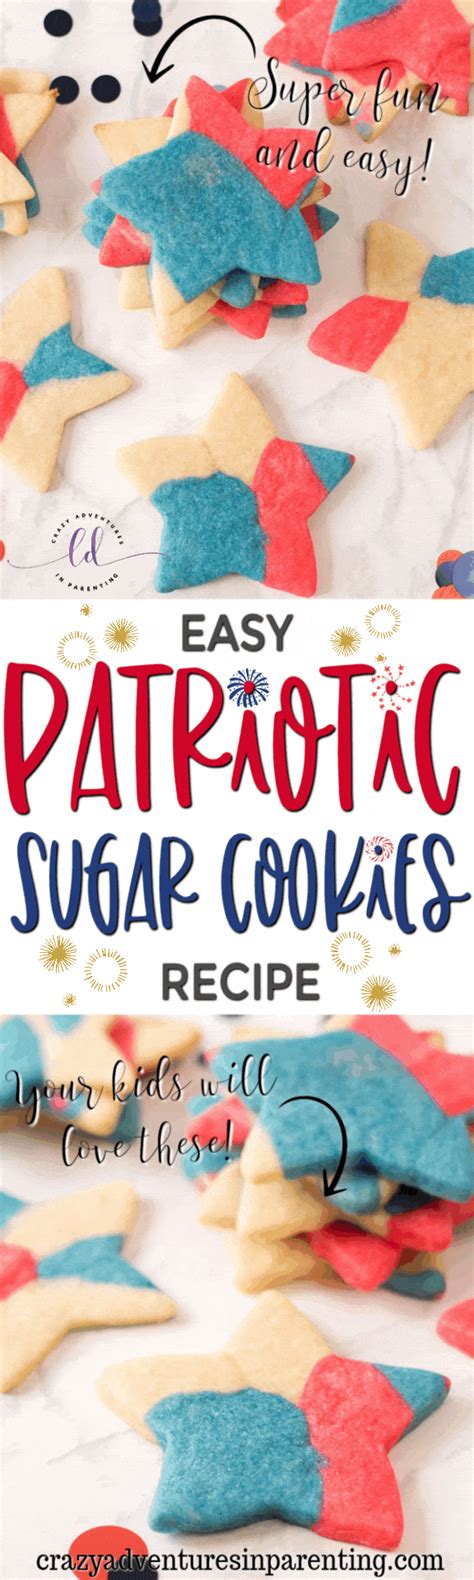 Patriotic Sugar Cookies recipe - for Memorial Day, July 4th or Fourth of July, Labor Day, Flag ...